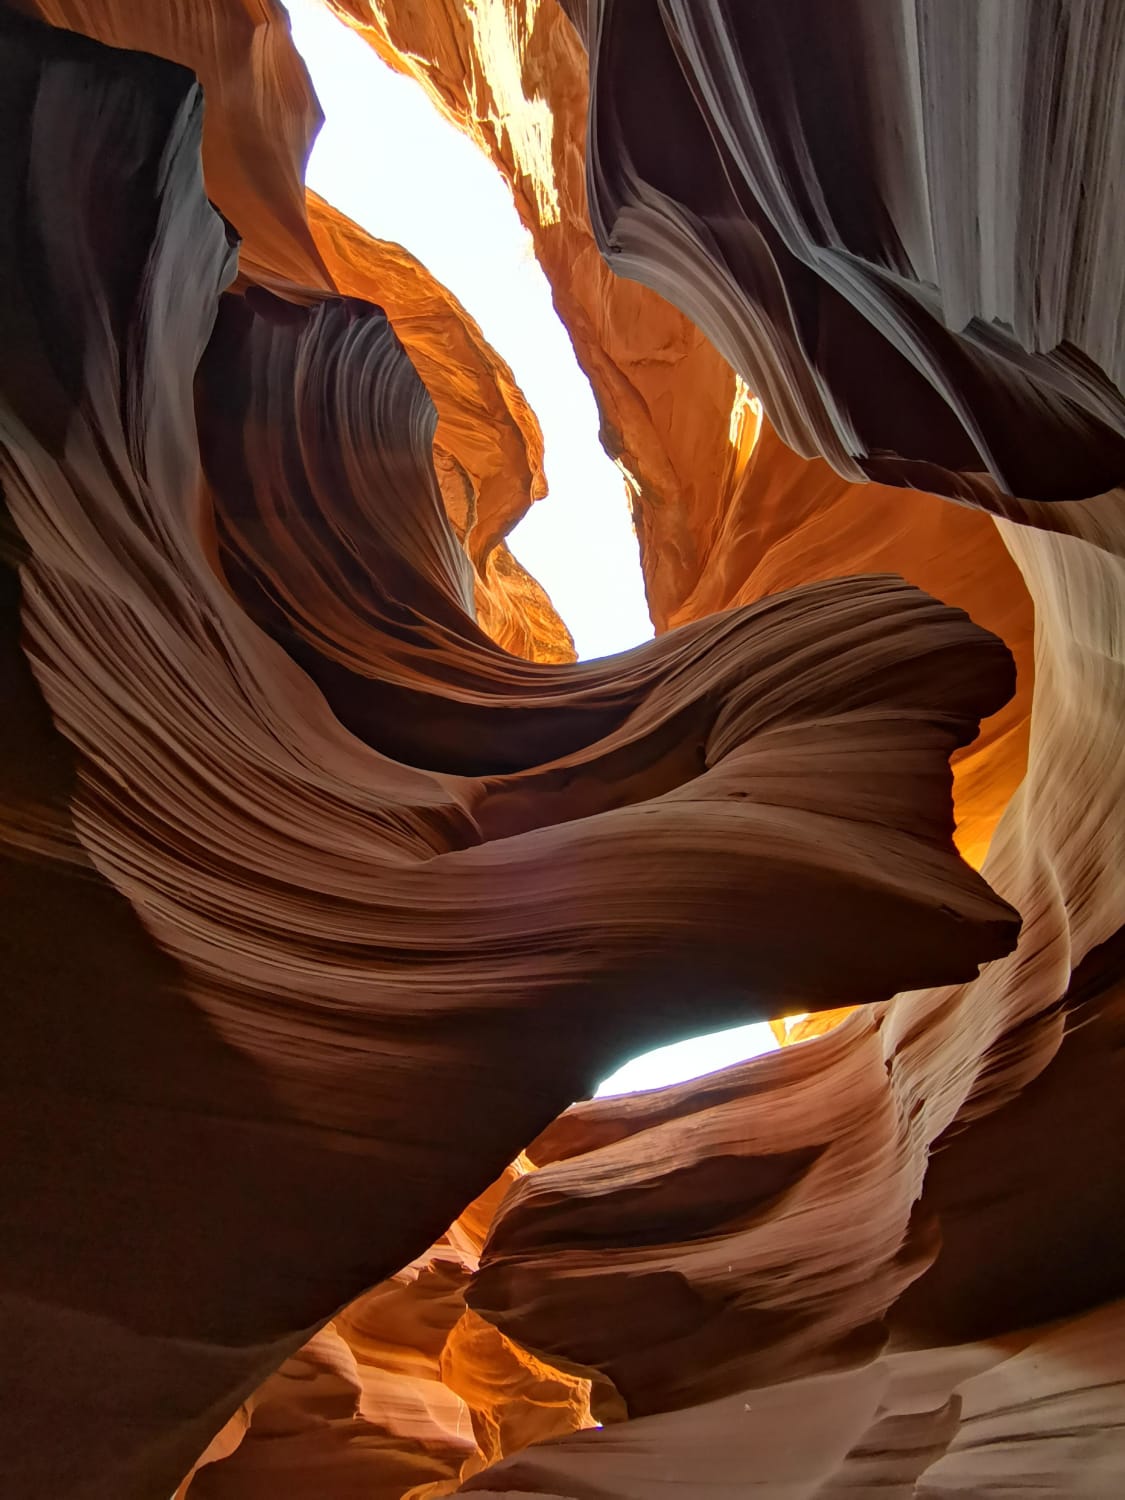 We visited the Lady in the Wind at Antelope Canyon last year [oc]